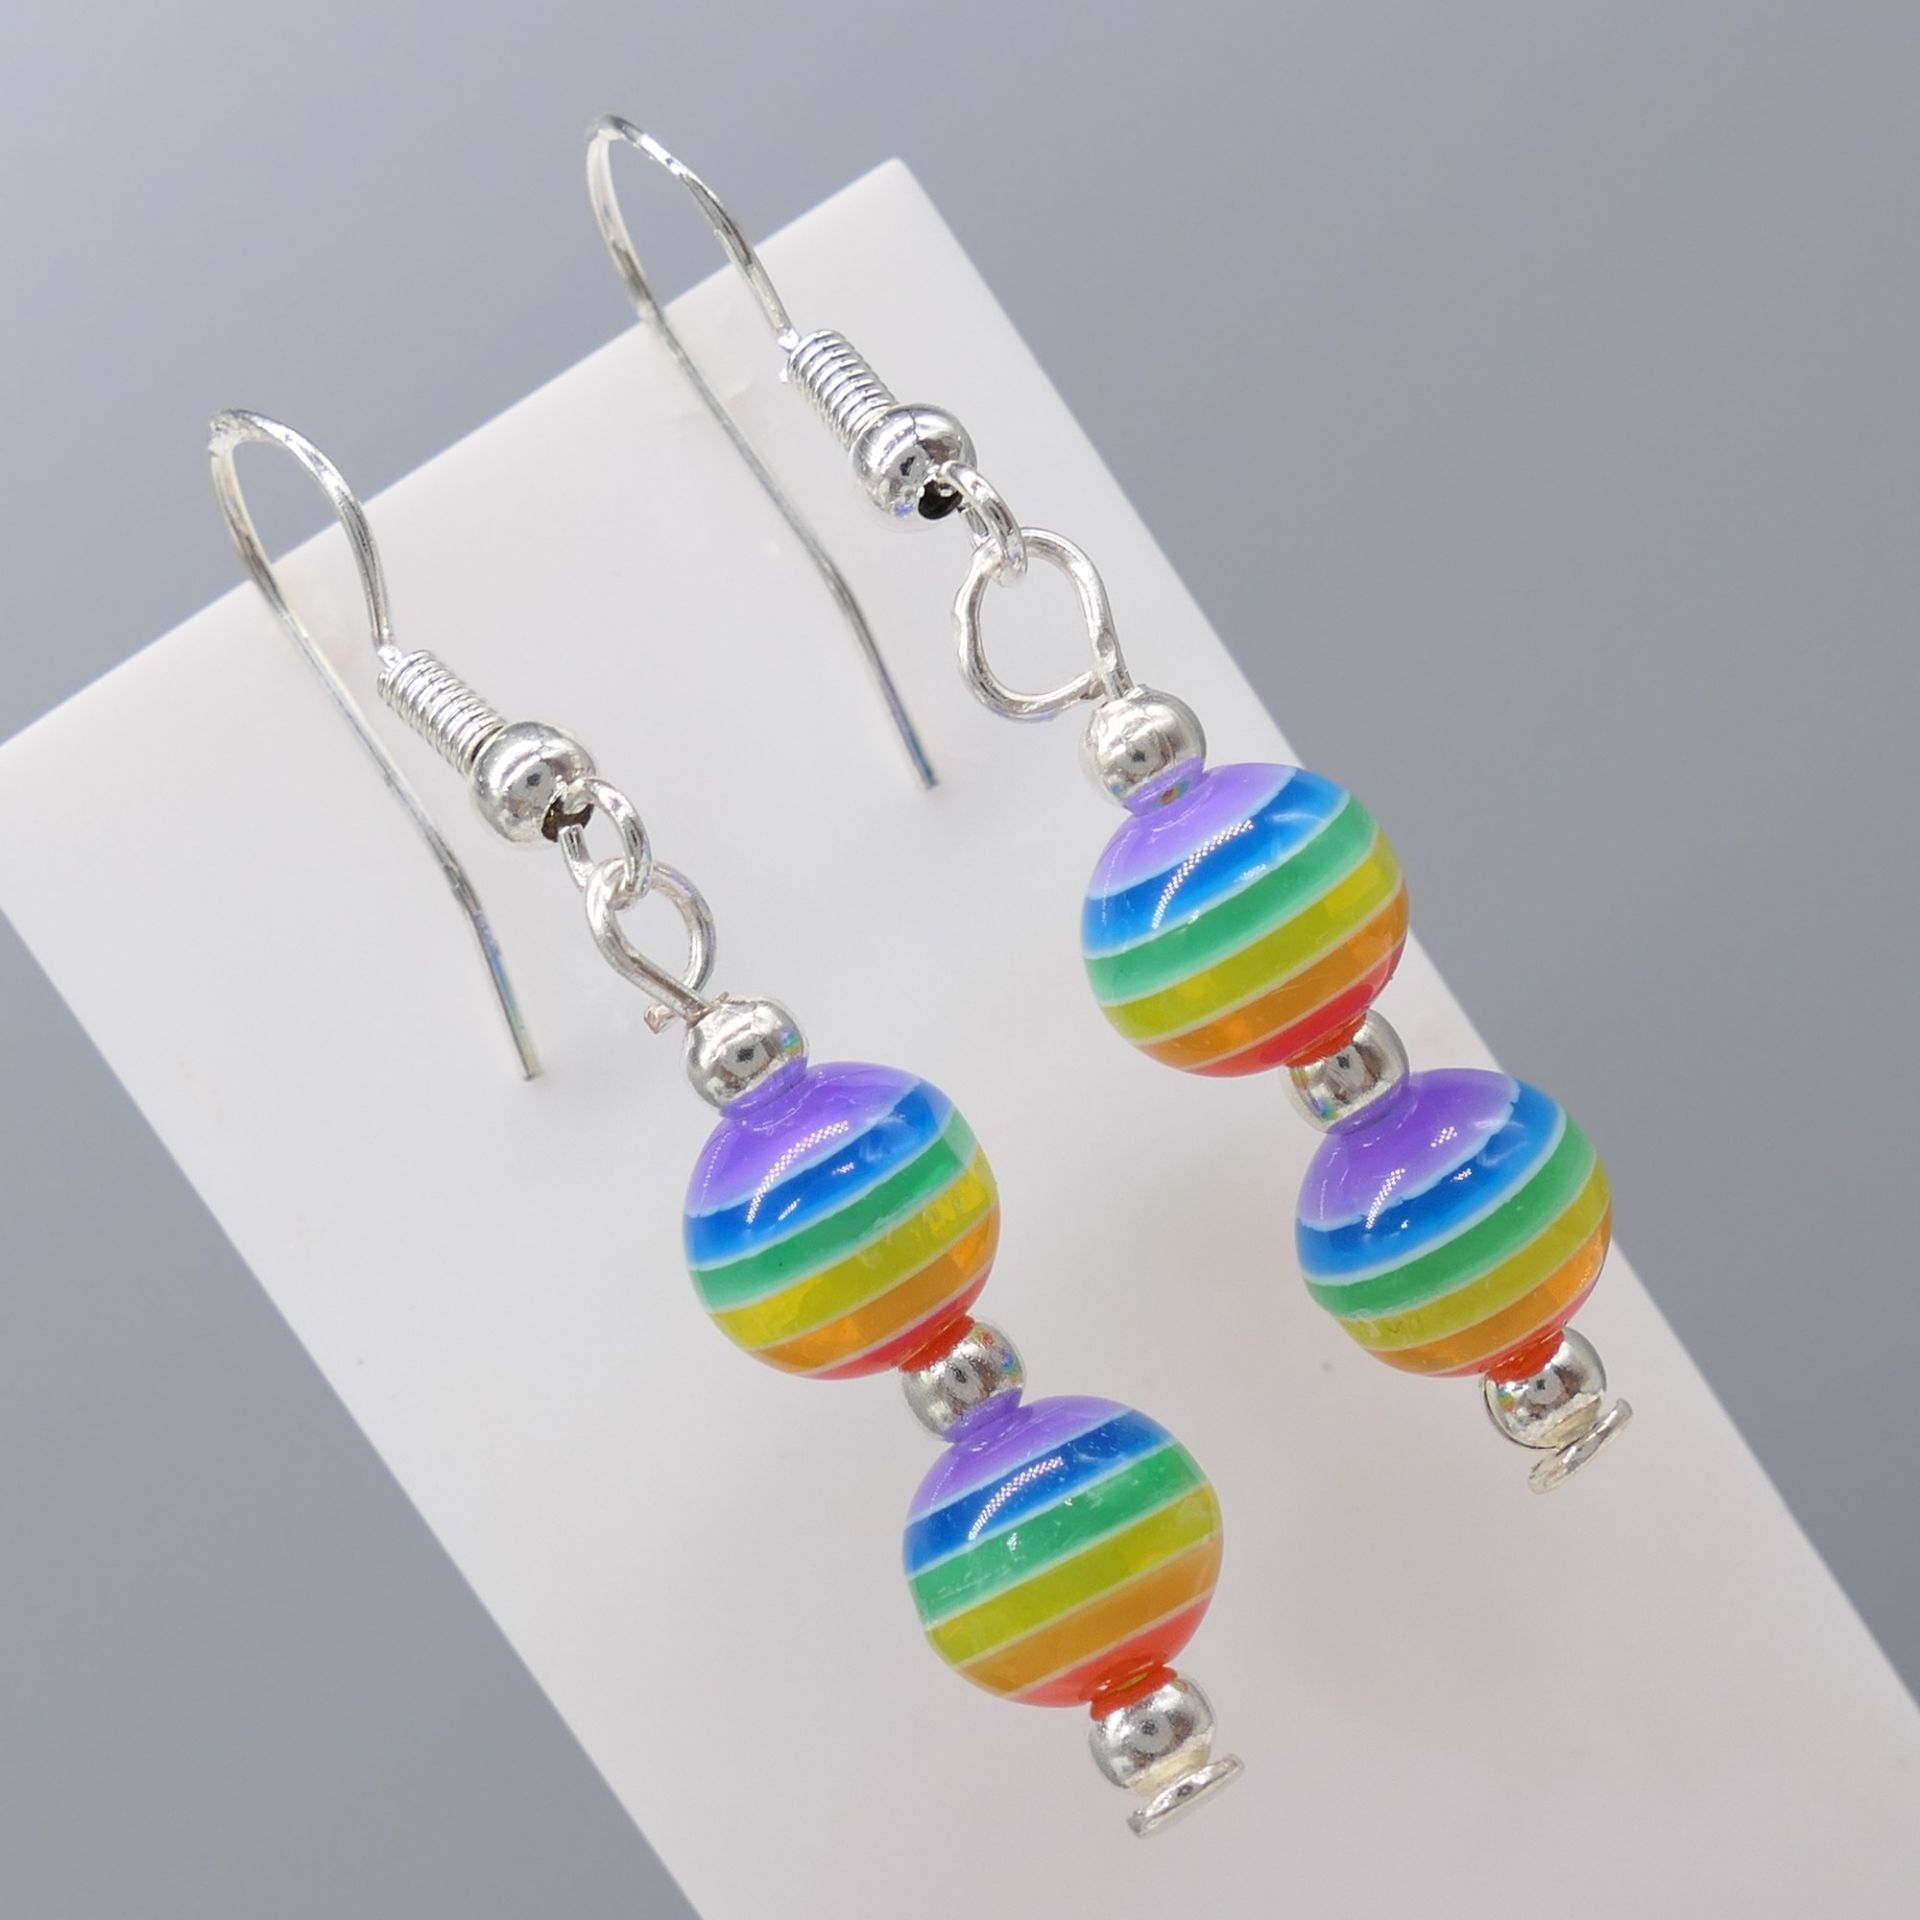 Silver and Resin Bead Drop Earrings X Two Pairs - Image 8 of 8